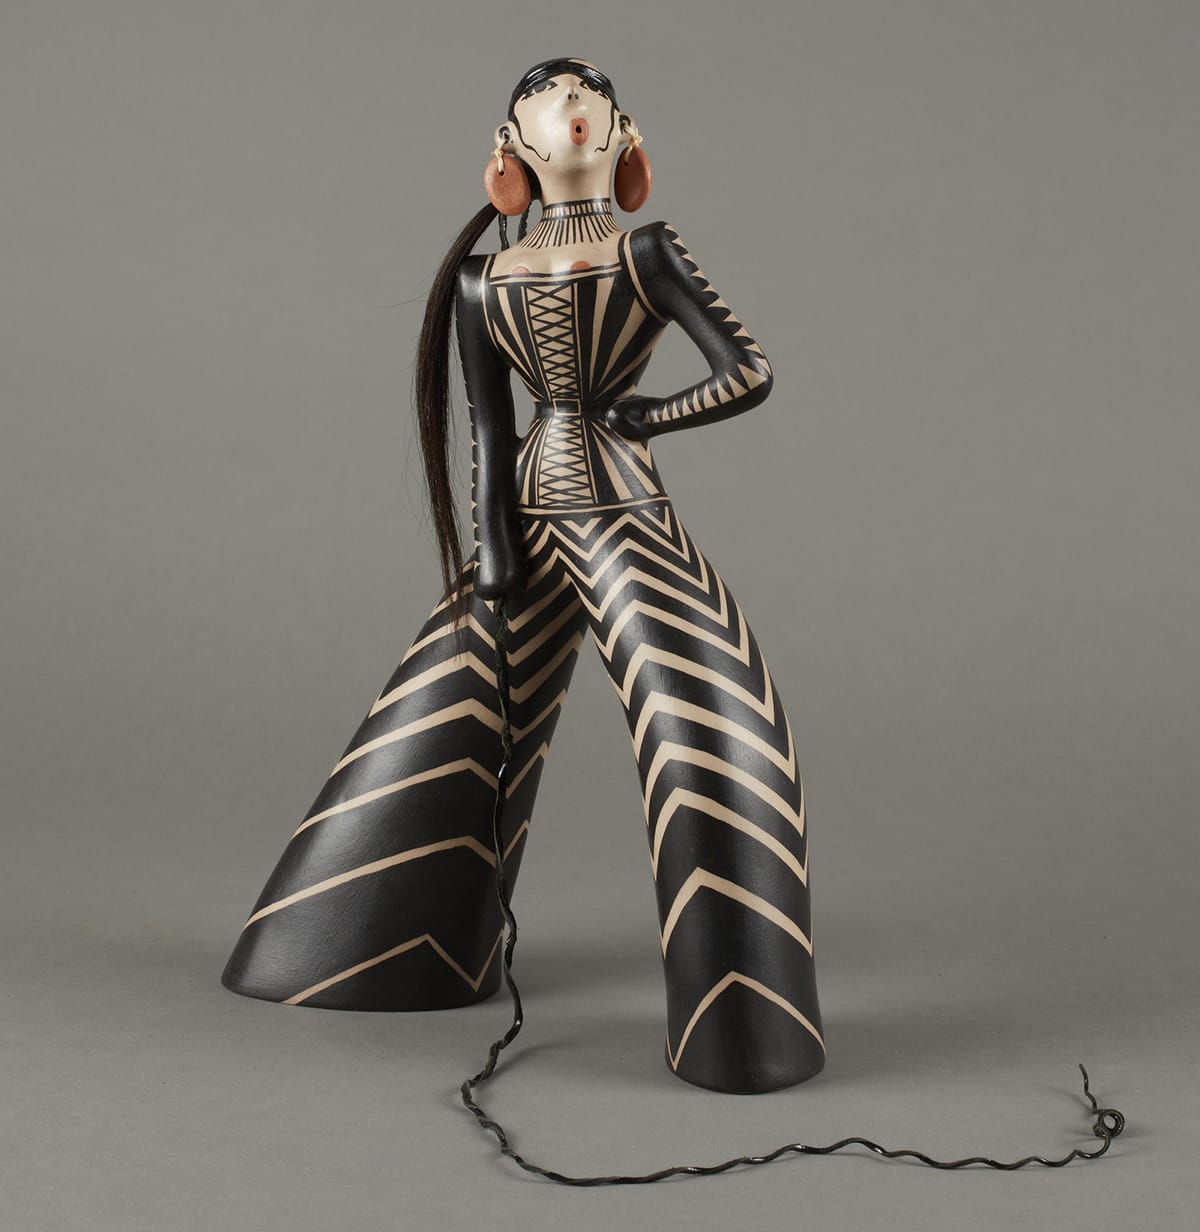 Stylized figure adorned with black-and-white triangular patterns. Details include reddish circular earrings similar to the shape of the lips, a long ponytail, and whip.